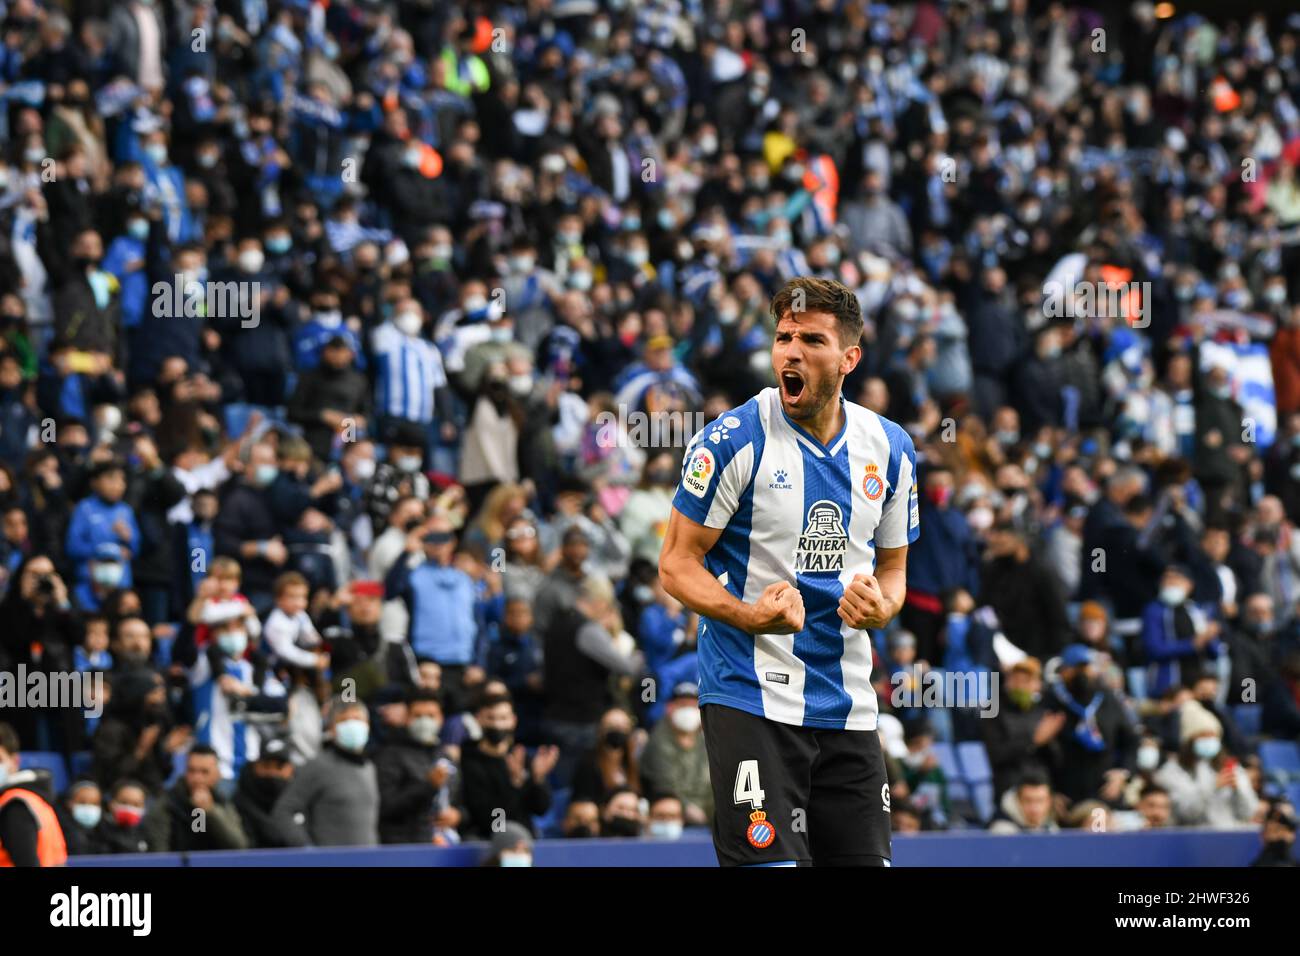 BARCELONA/SPAIN - MARCH 5: Leandro Cabrera of Espanyol celebrates after scoring a goal during La Liga match between Espanyol and Getafe at RCDE Stadium on March 5, 2022 in Barcelona, Spain. (Photo by Sara Aribó/Pximages) Stock Photo